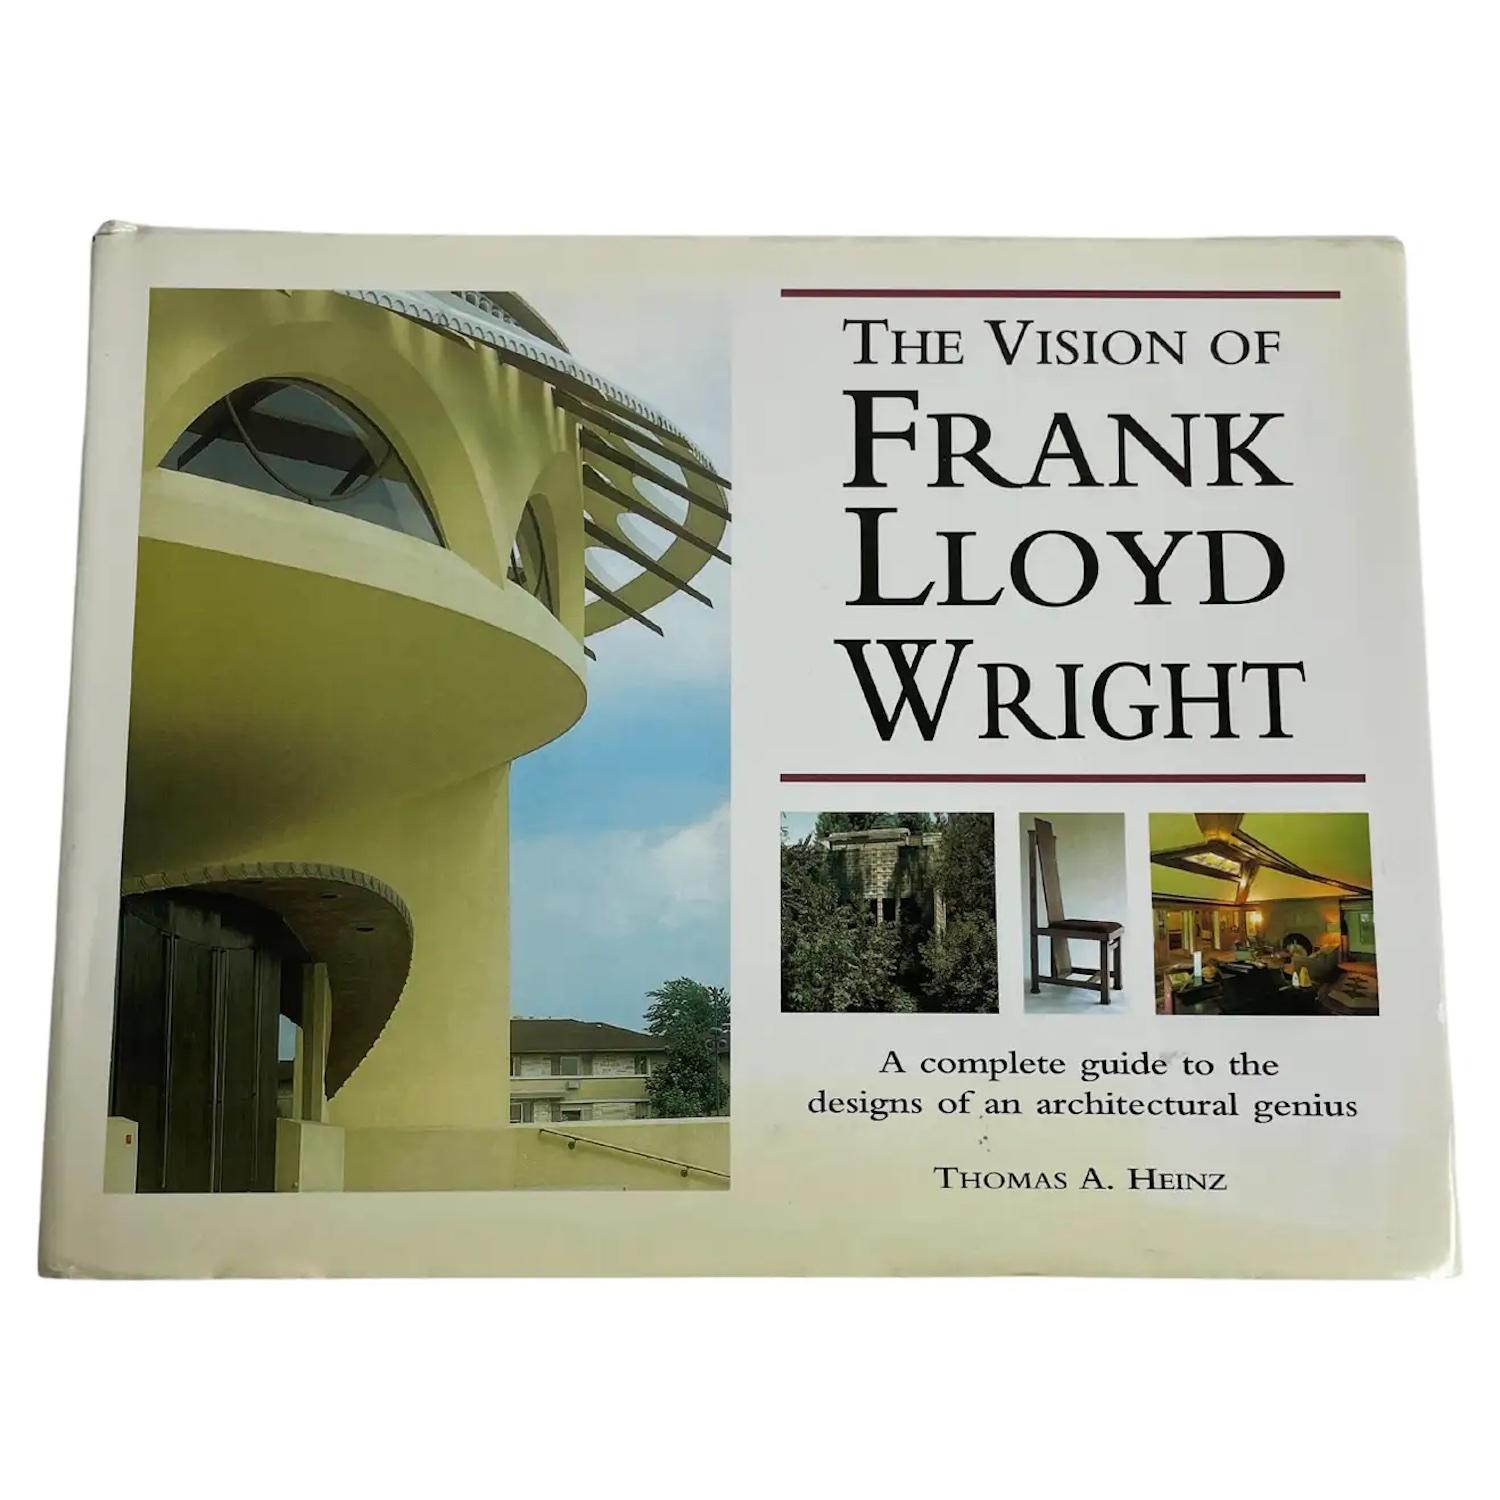 The Vision of Frank Lloyd Wright. by Thomas A. Heinz large heavy hardcover coffee table book.
A Complete Guide To The Designs Of An Architectural Genius.
Frank Lloyd Wright's career, sometimes tragic, sometimes tempestuous - at all times creative